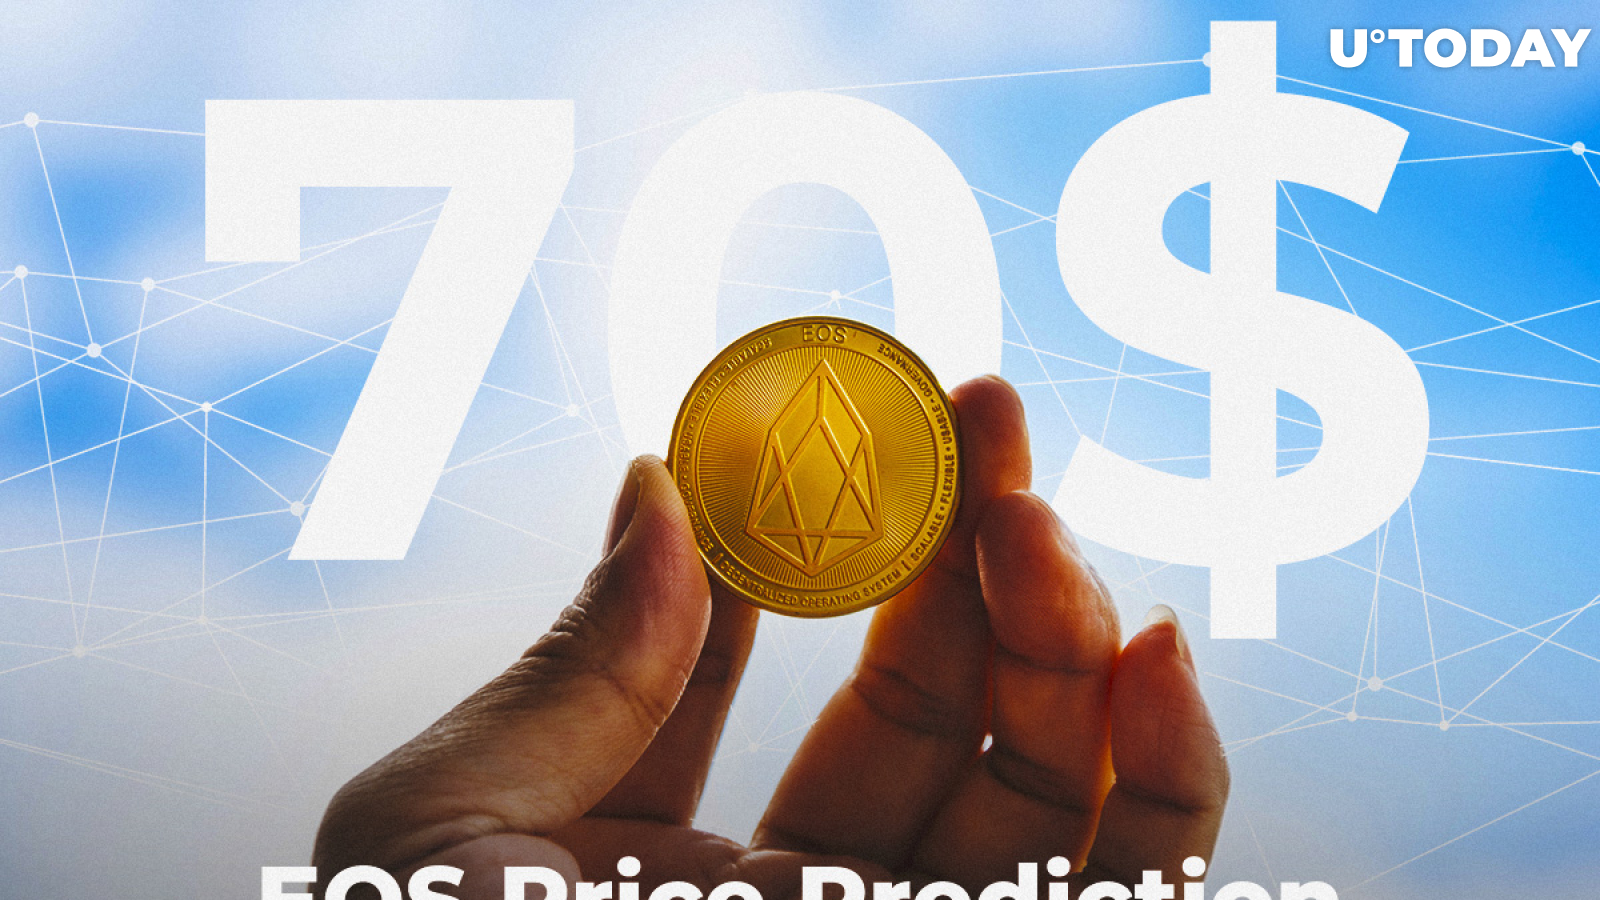 EOS Price Prediction for 2019: 70$ or Less?